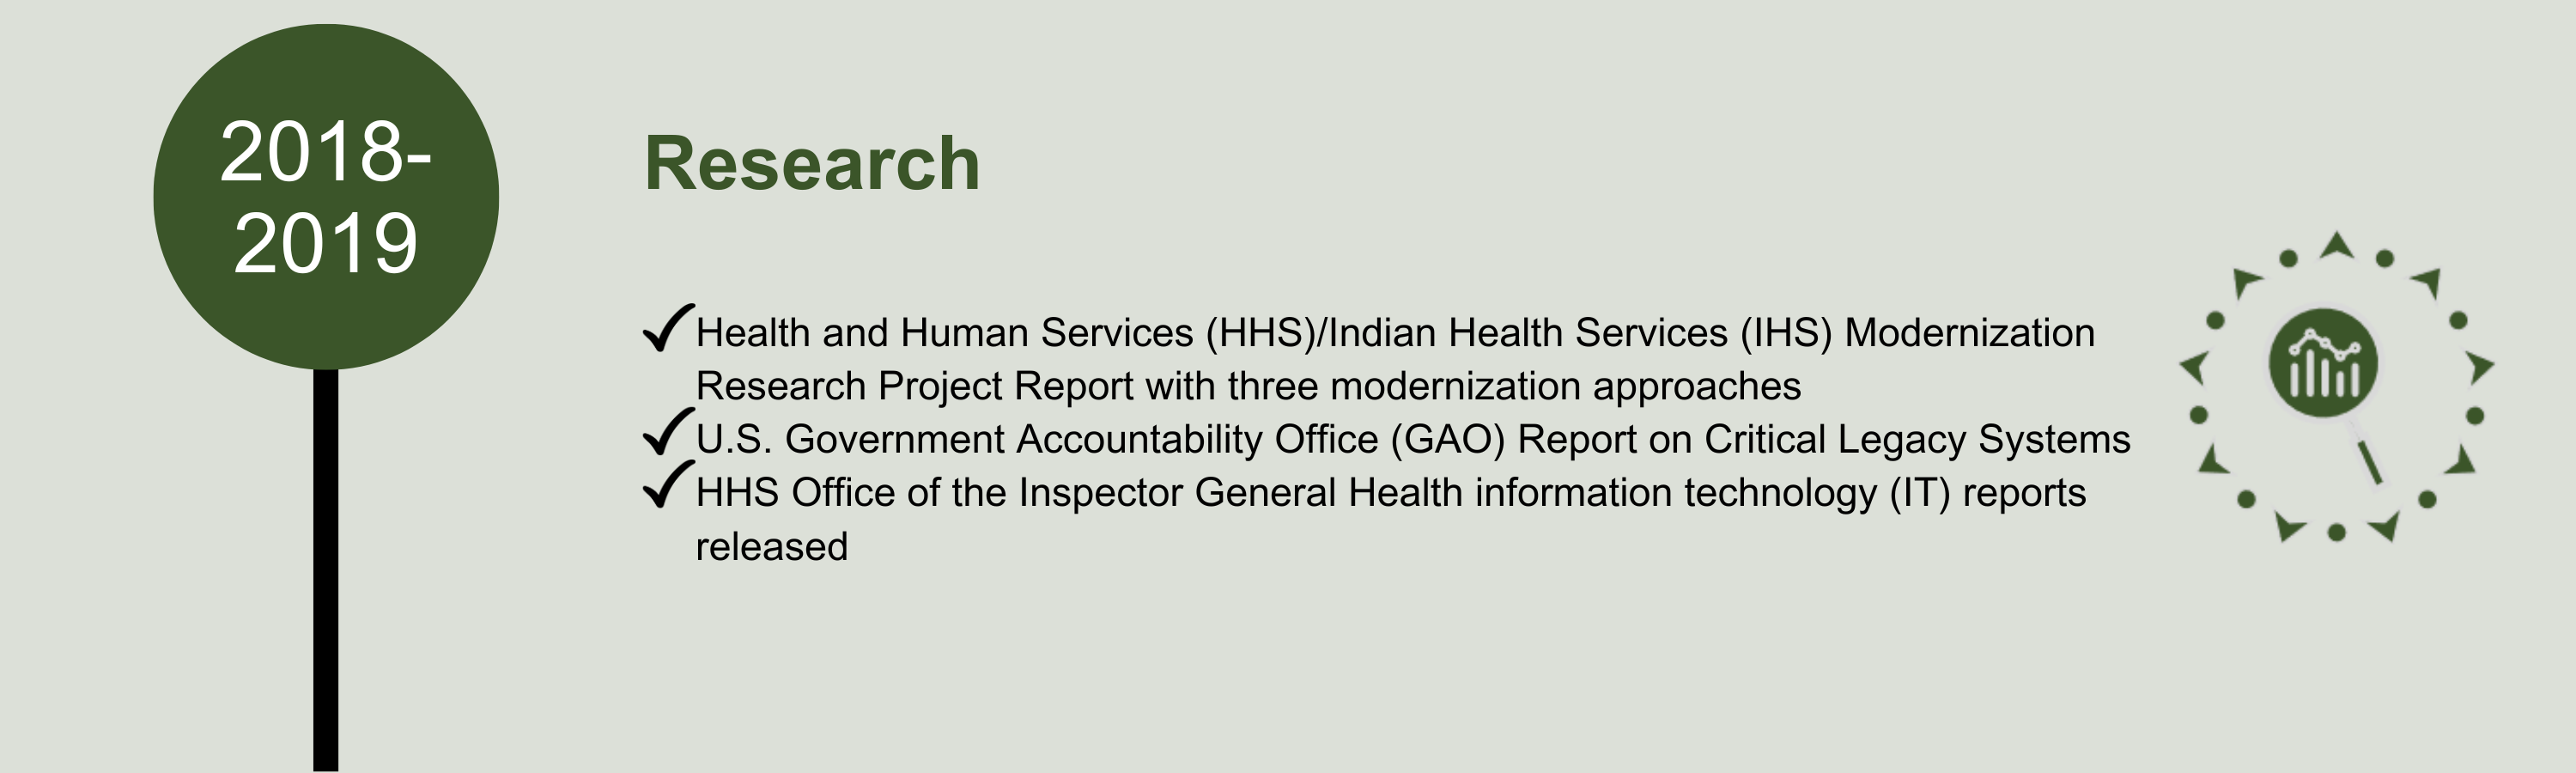 Research (2018-2018)
- Health and Human Services (HHS)/Indian Health Services (IHS) Modernization Research Project Report with three modernization approaches 
- U.S. Government Accountability Office (GAO) Report on Critical Legacy Systems 
- HHS Office of the Inspector General Health information technology (IT) reports released
